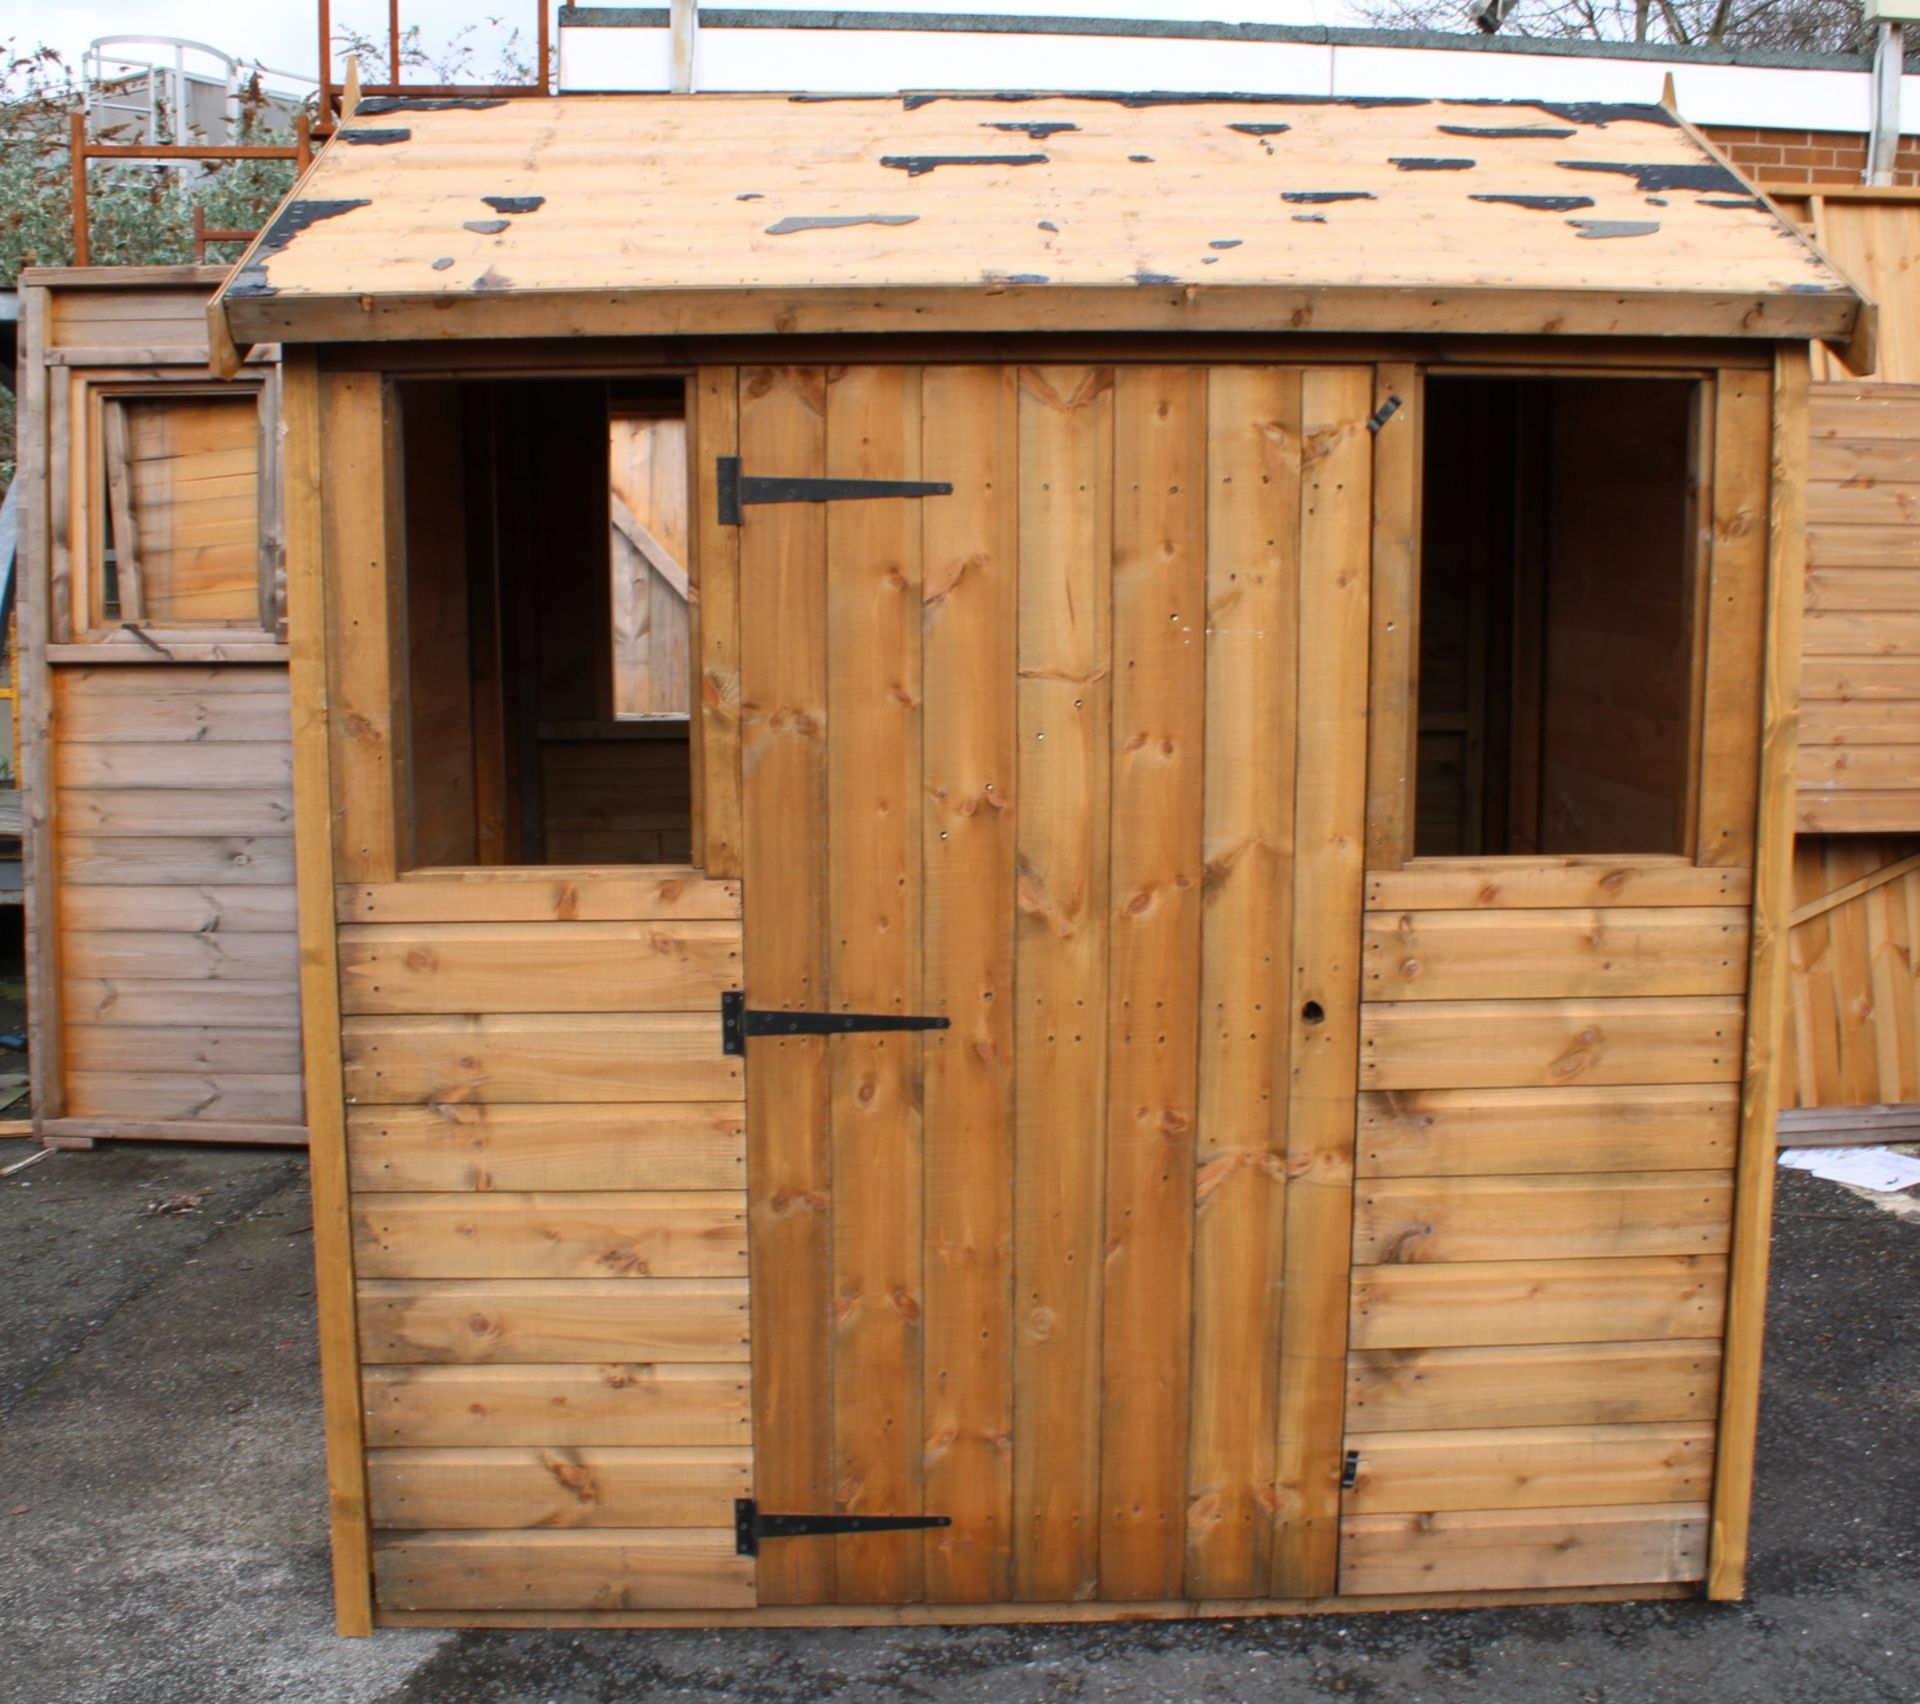 6x4 standard apex building with front and back windows, Standard 16mm Nominal Cladding RRP£638